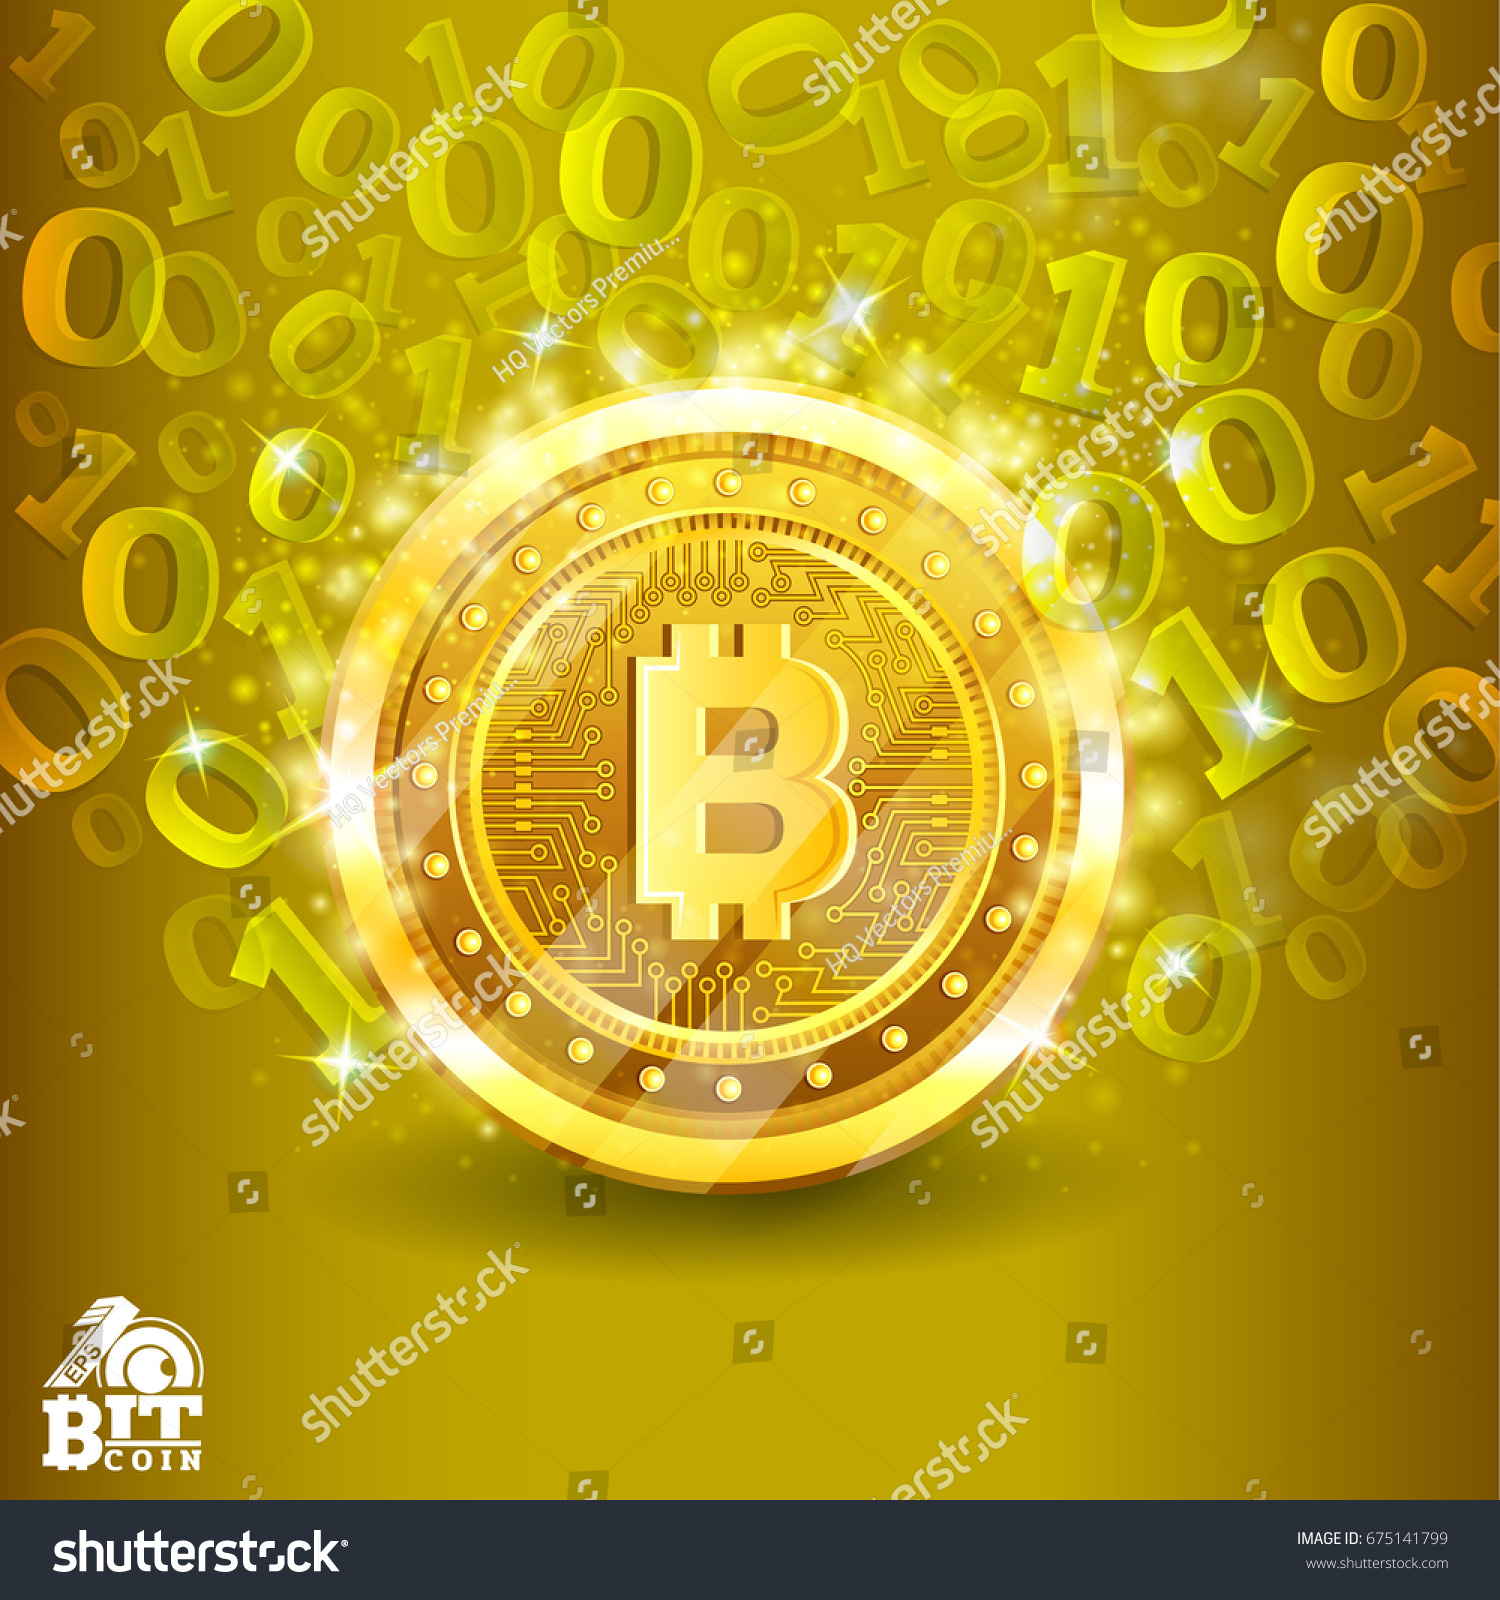 SVG of Golden bit coin in the center of yellow background with binary code. Abstract vector glossy business background svg